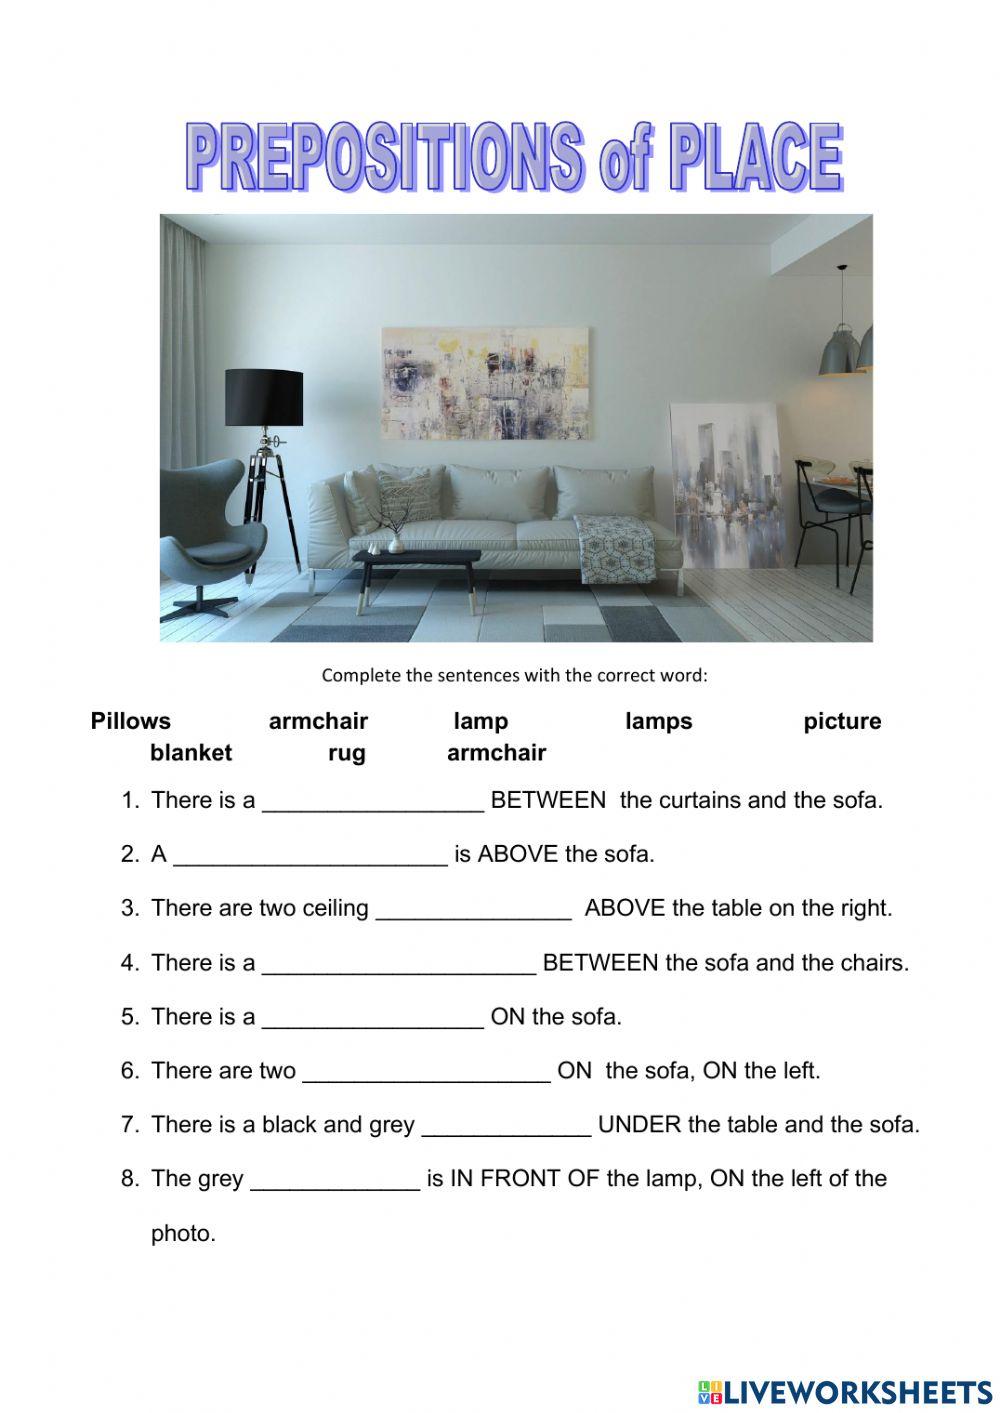 Place prepositions and items house